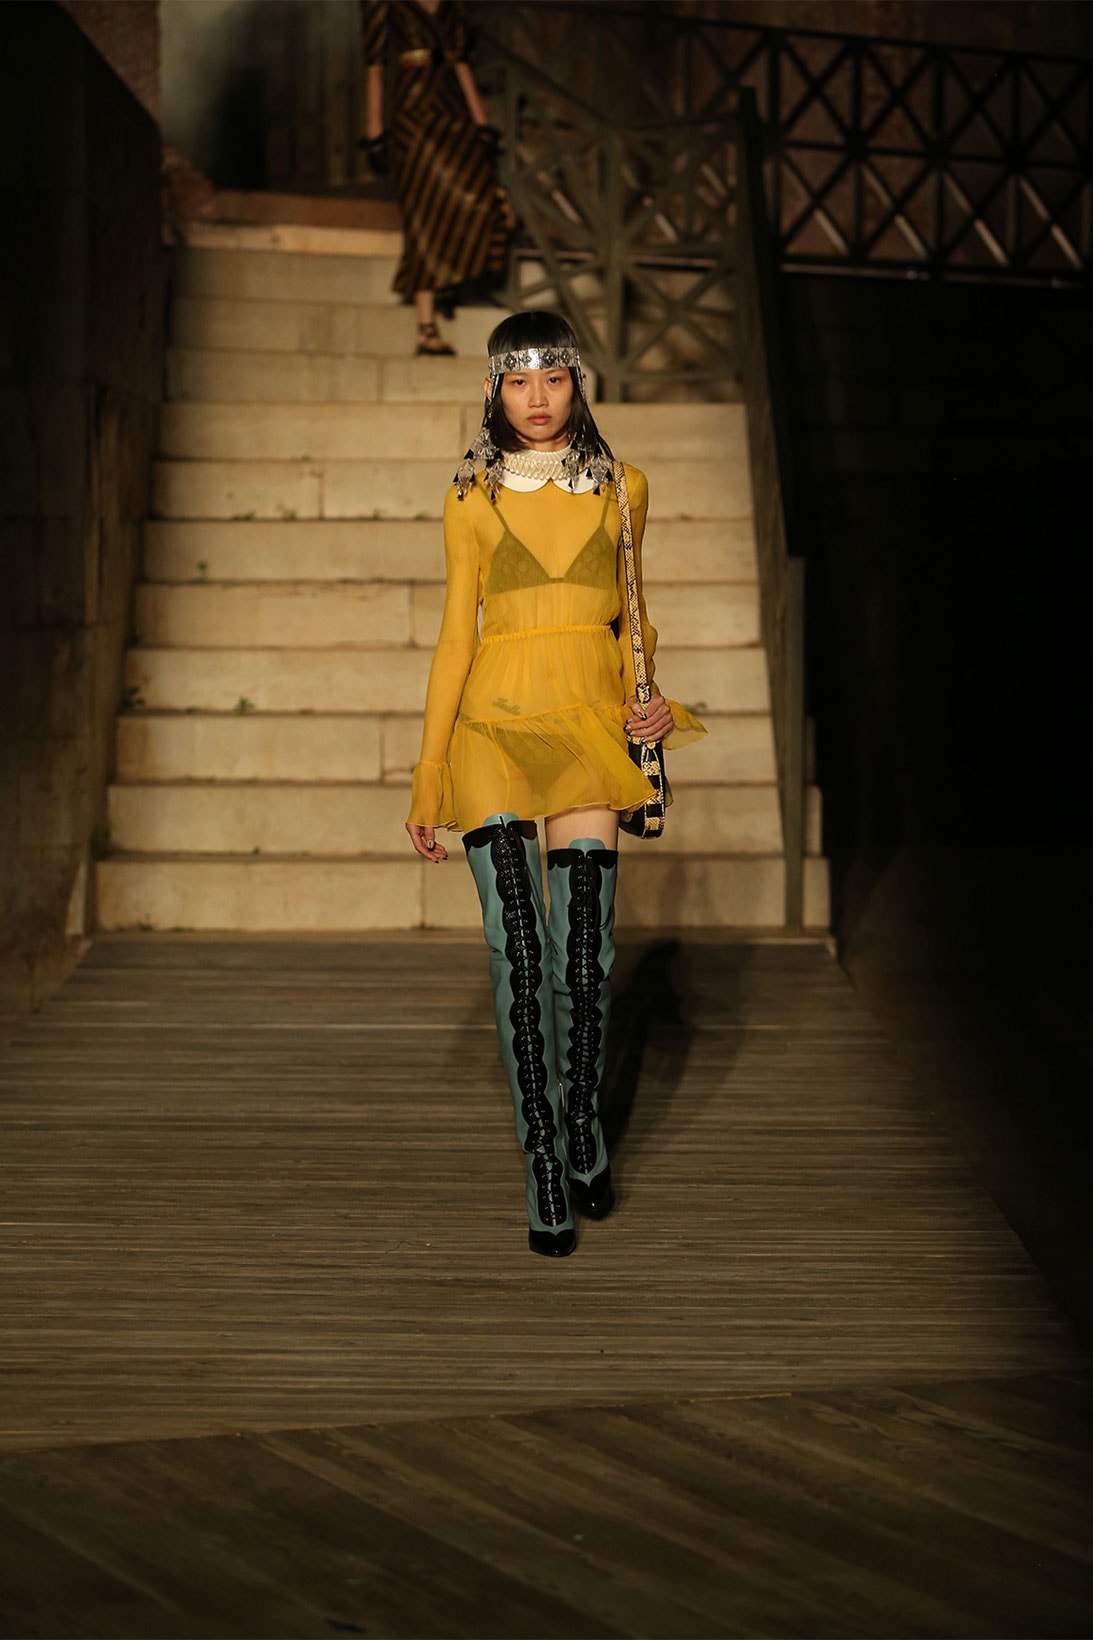 Gucci "Cosmogonie" Constellations Resort 2023 Collection Runway Alessandro Michele Images